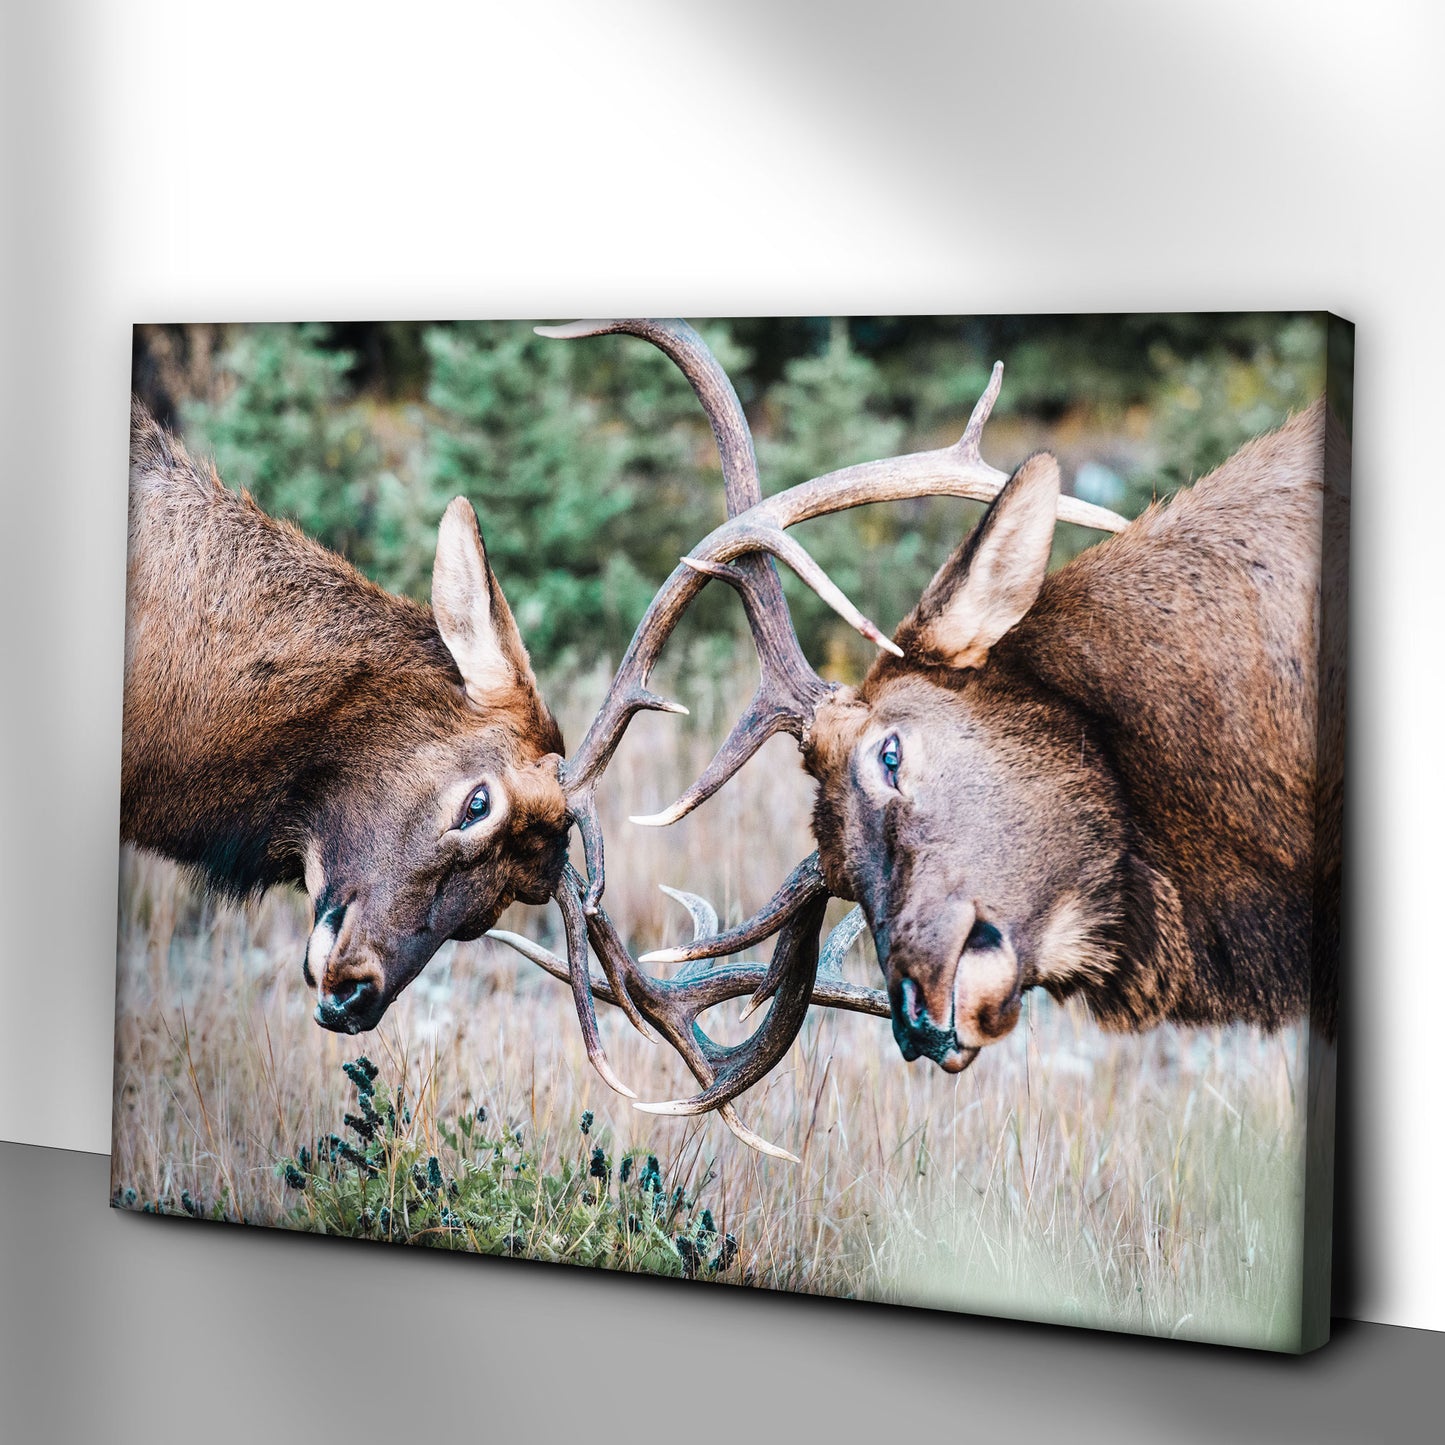 Deer Bucks Sparring Canvas Wall Art Style 1 - Image by Tailored Canvases